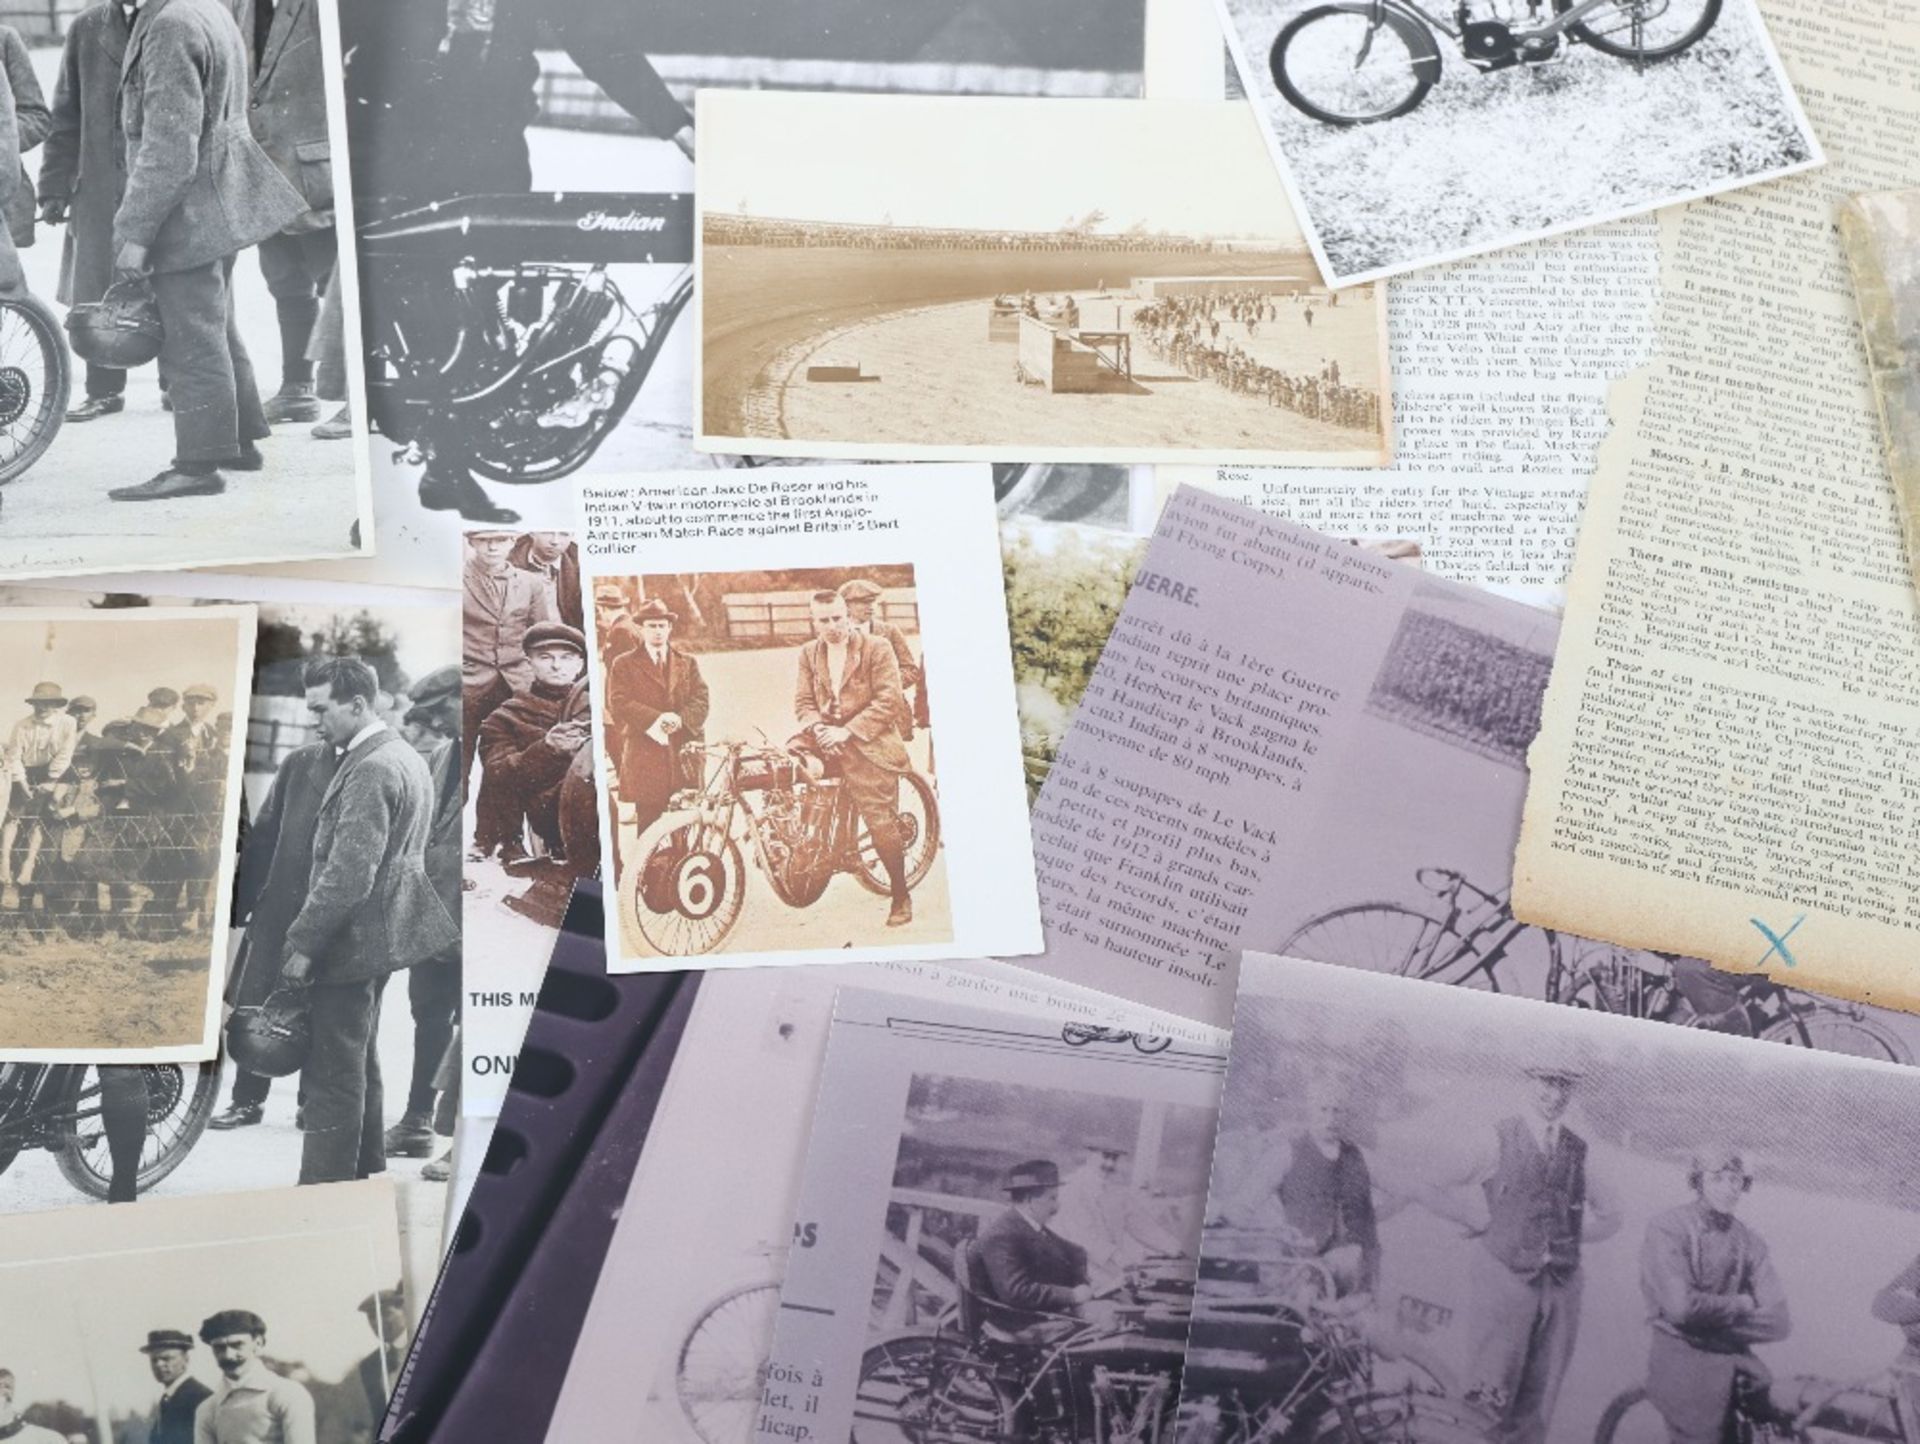 Motorcycling and cycling ephemera for Indian Motorcycles, early 20th century - Image 3 of 5